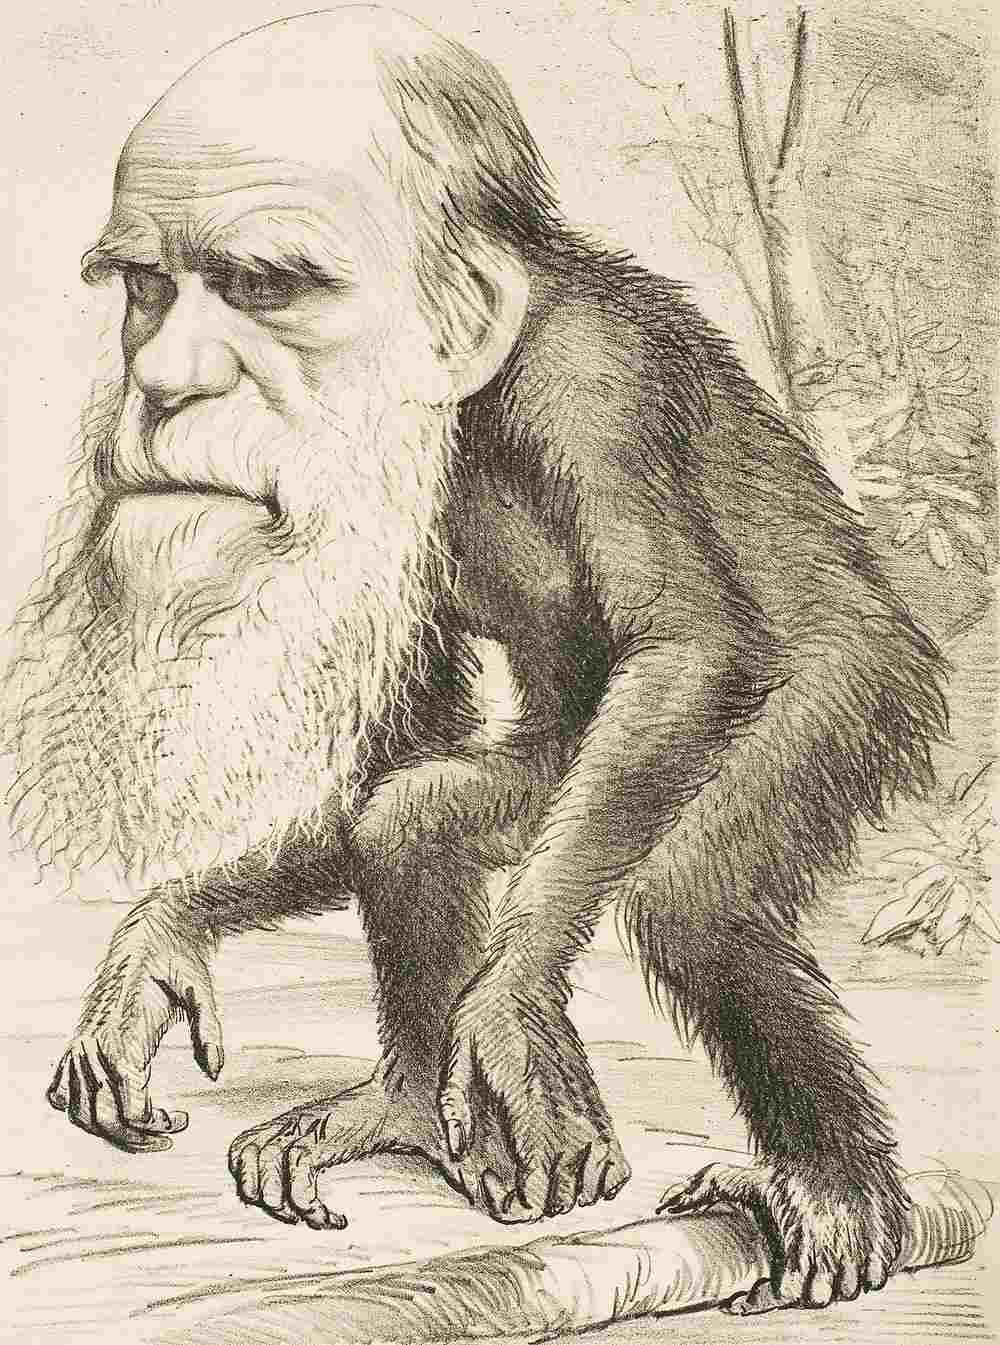 As evolution became widely accepted in the 1870s, caricatures of Charles Darwin with the body of an ape or monkey symbolised evolution. Image credit: WIkipedia